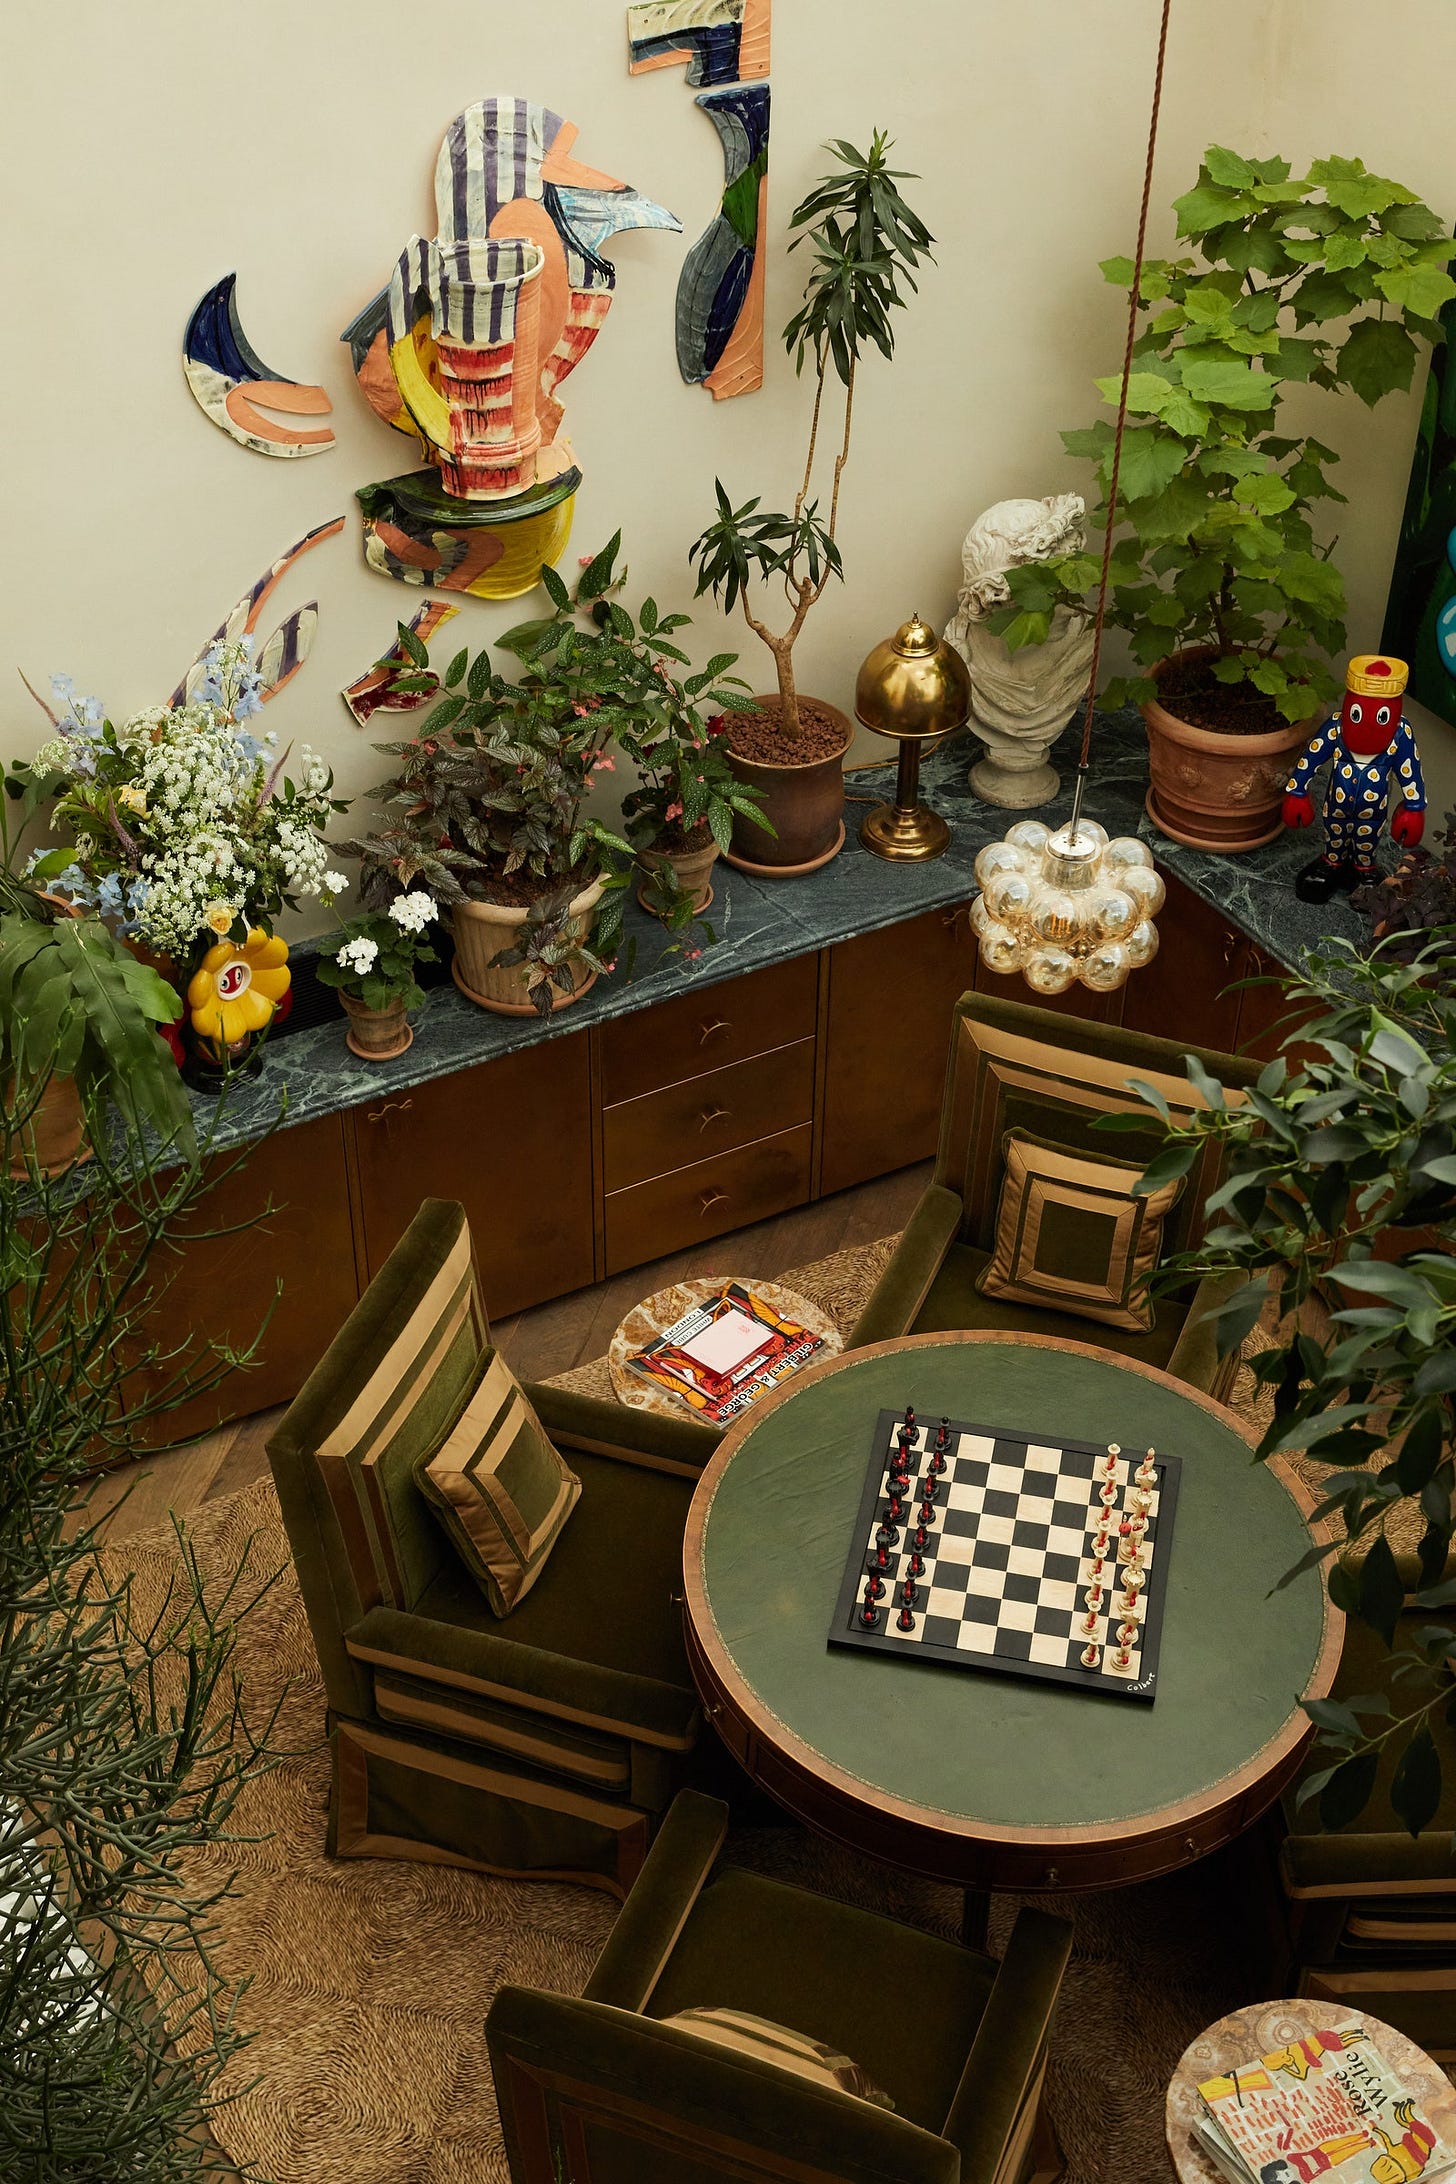 The games area which features a Philip Colbert lobster chess set on a vintage card table.